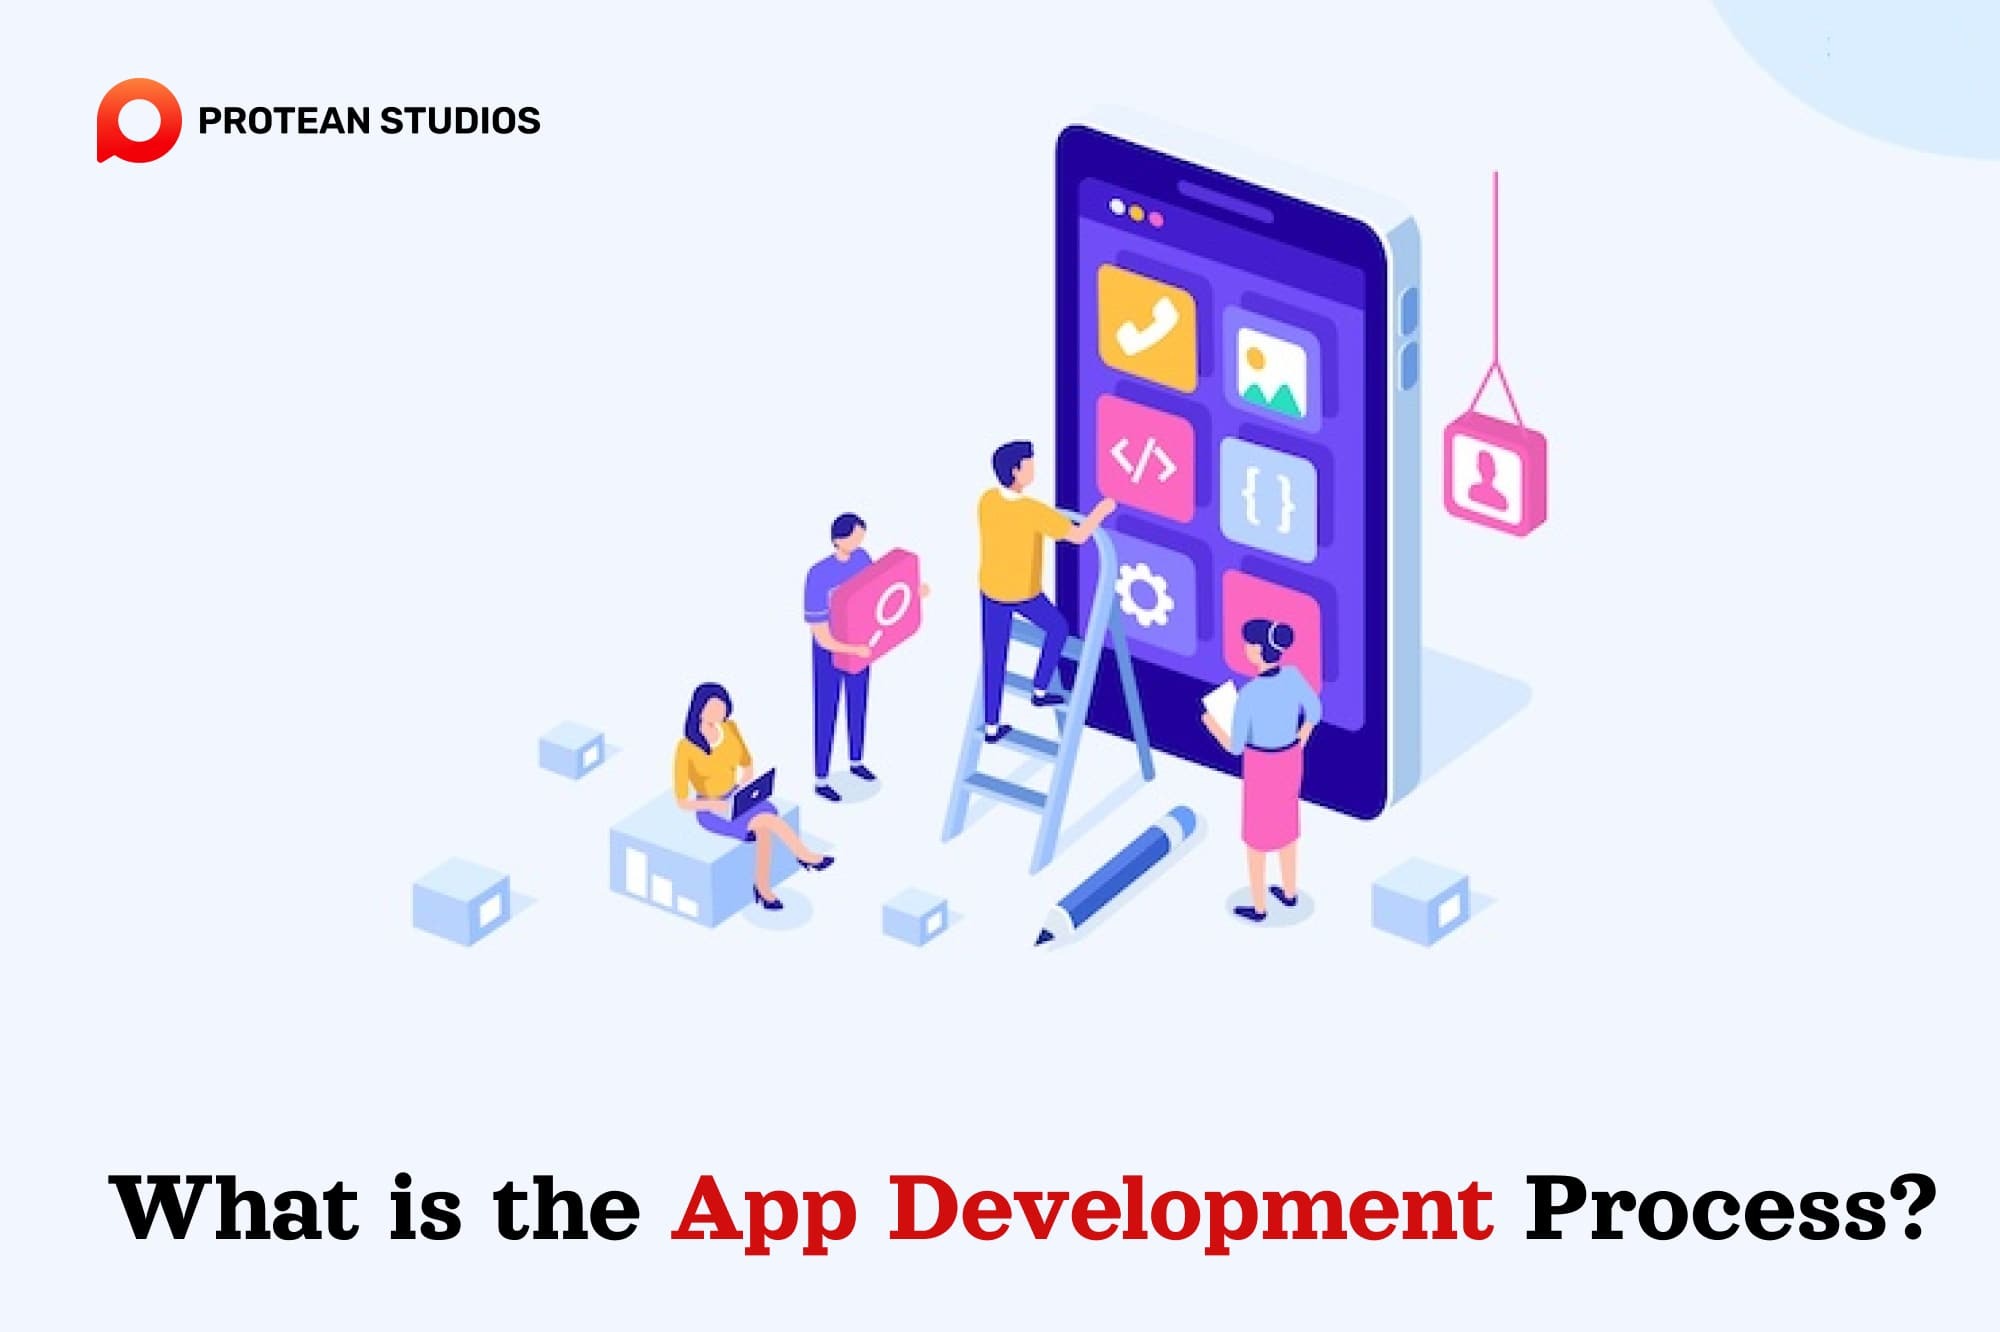 Definition and basic features of app development